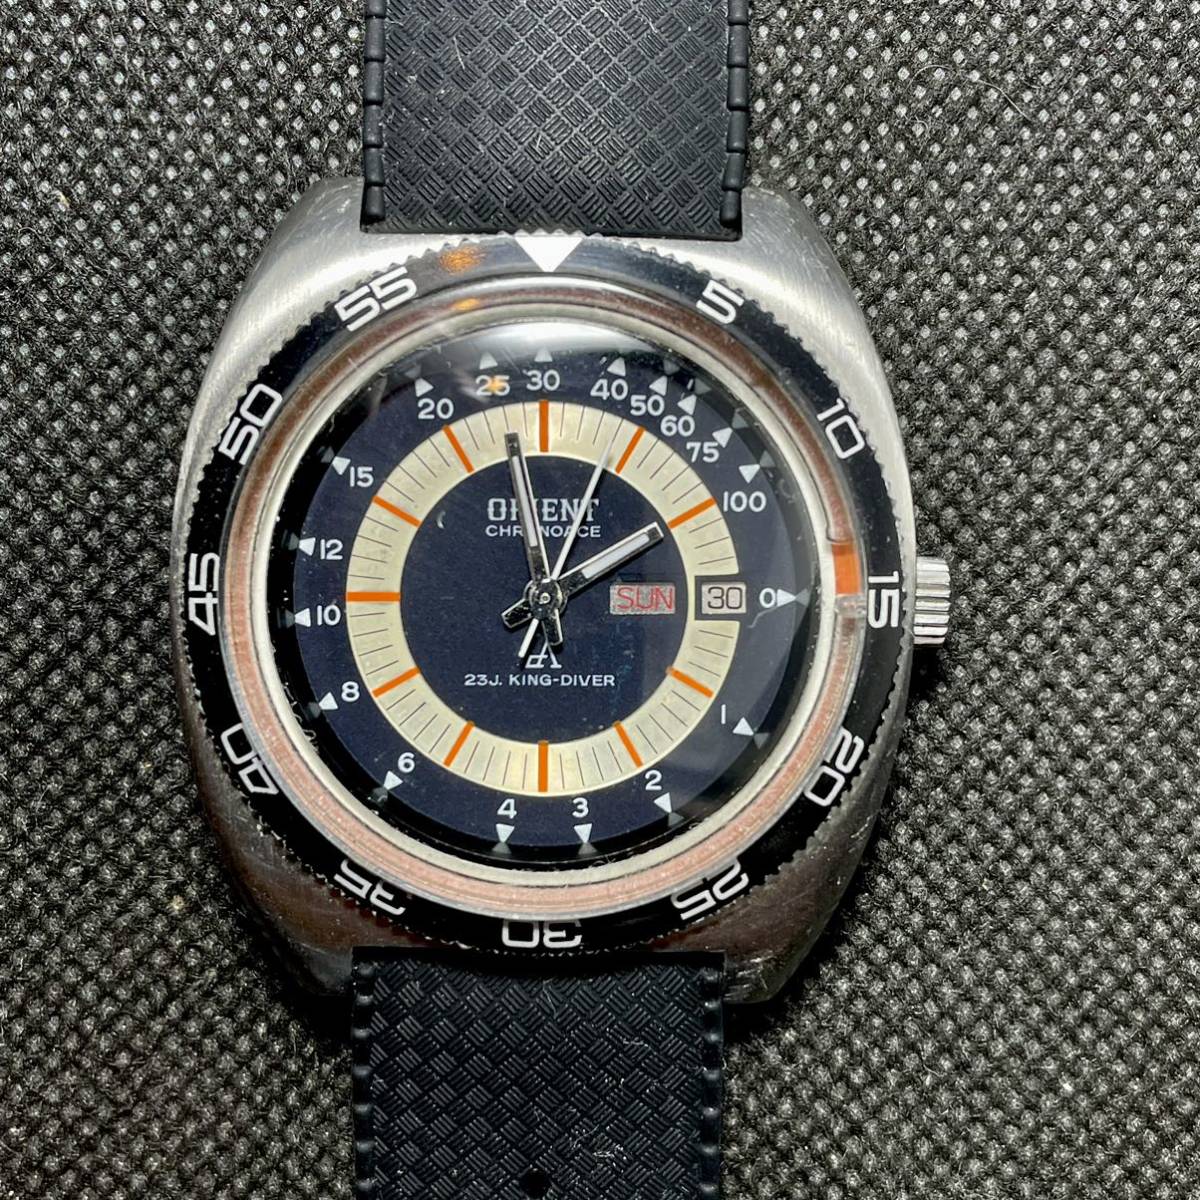  Orient Chrono Ace water deep total attaching King diver ( has overhauled )